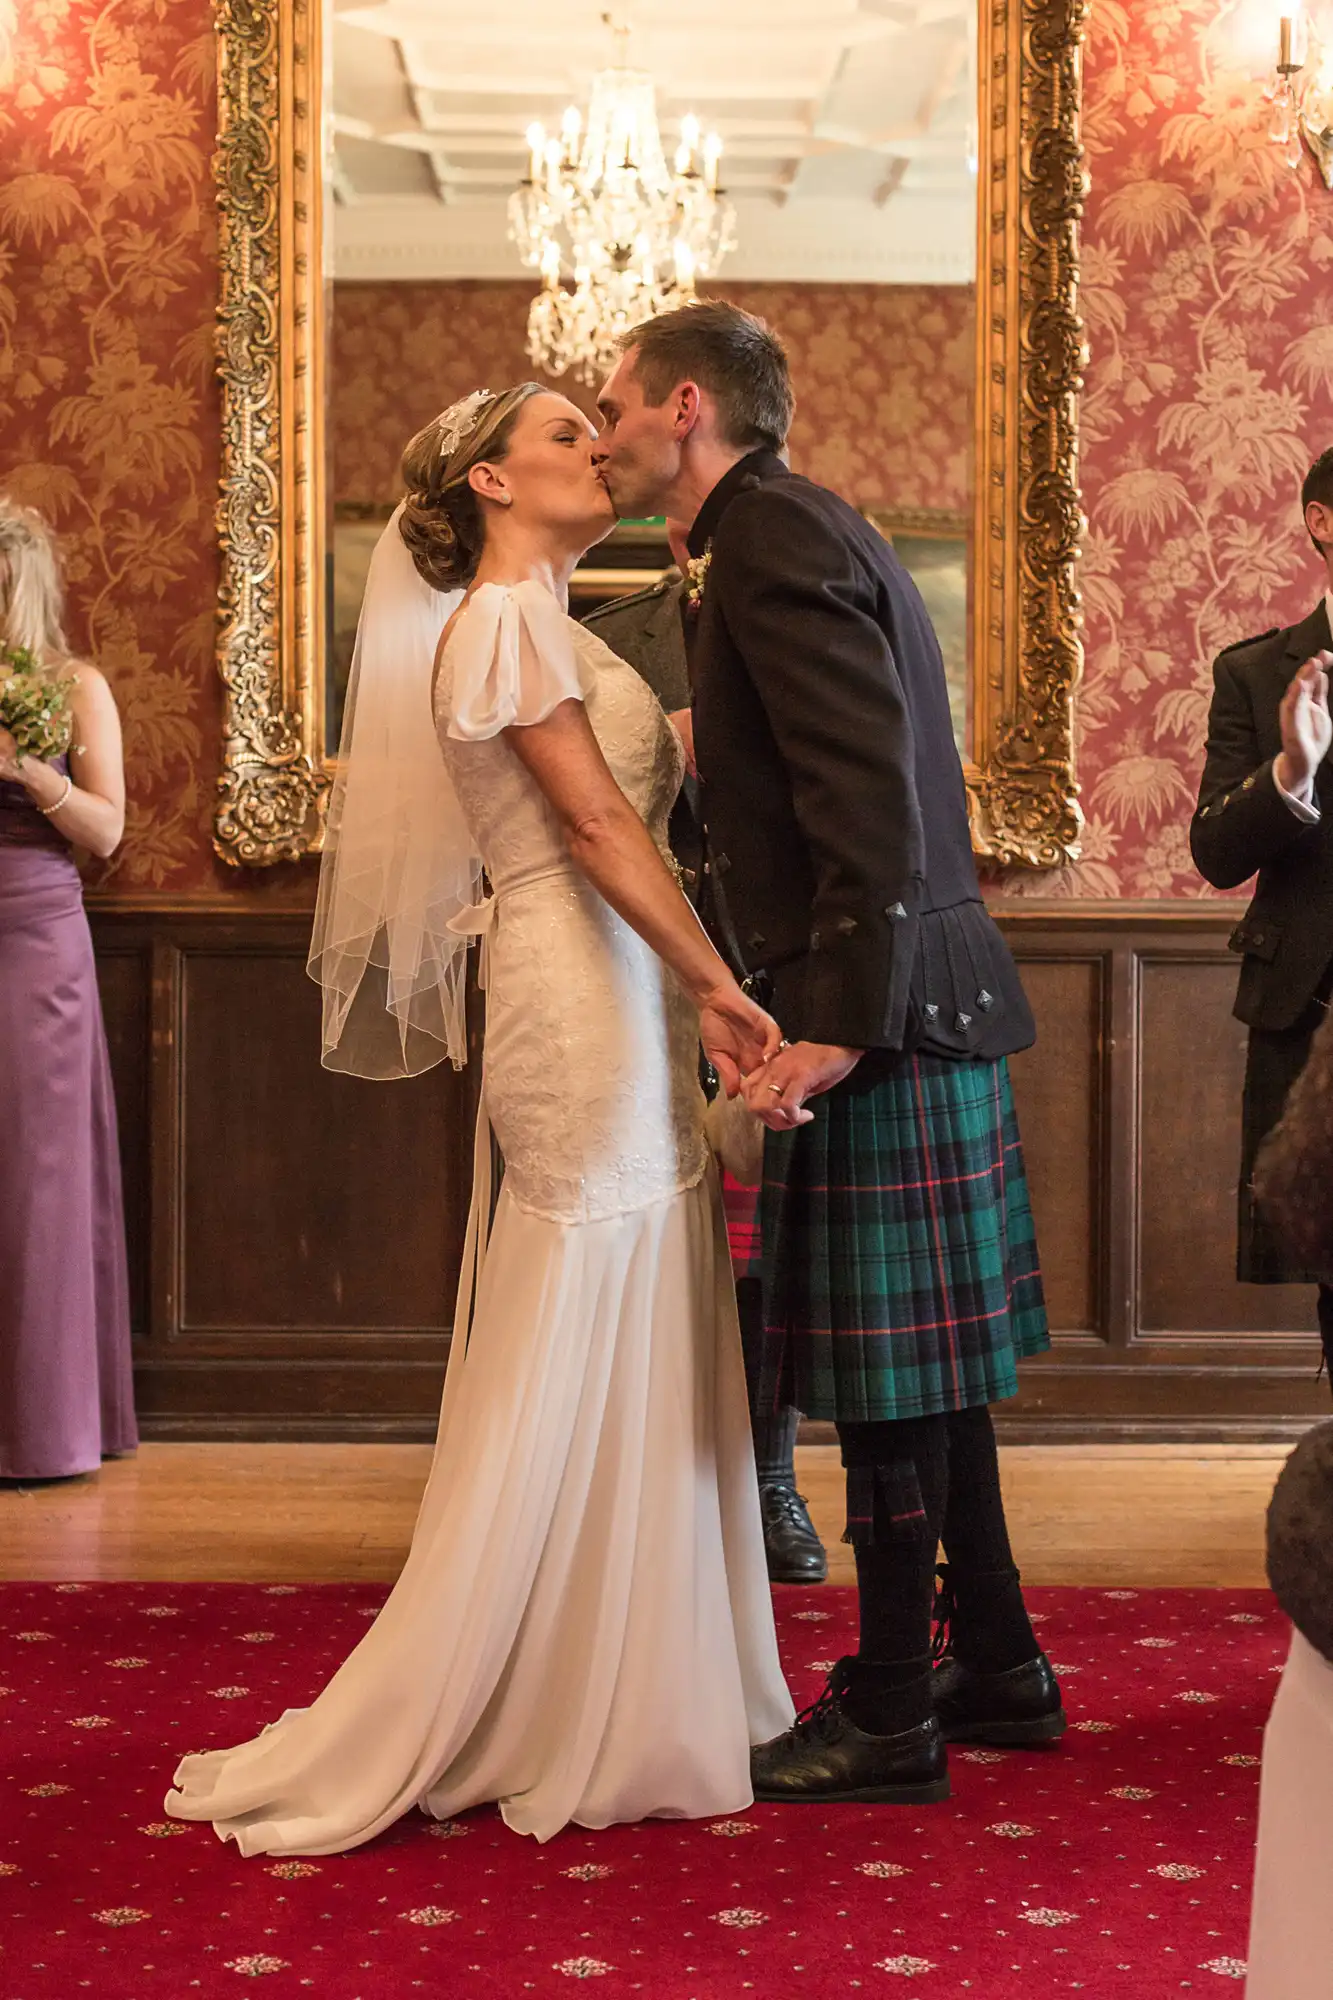 Bride in a white dress and groom in a kilt kissing at their wedding ceremony, with guests and ornate décor in the background.